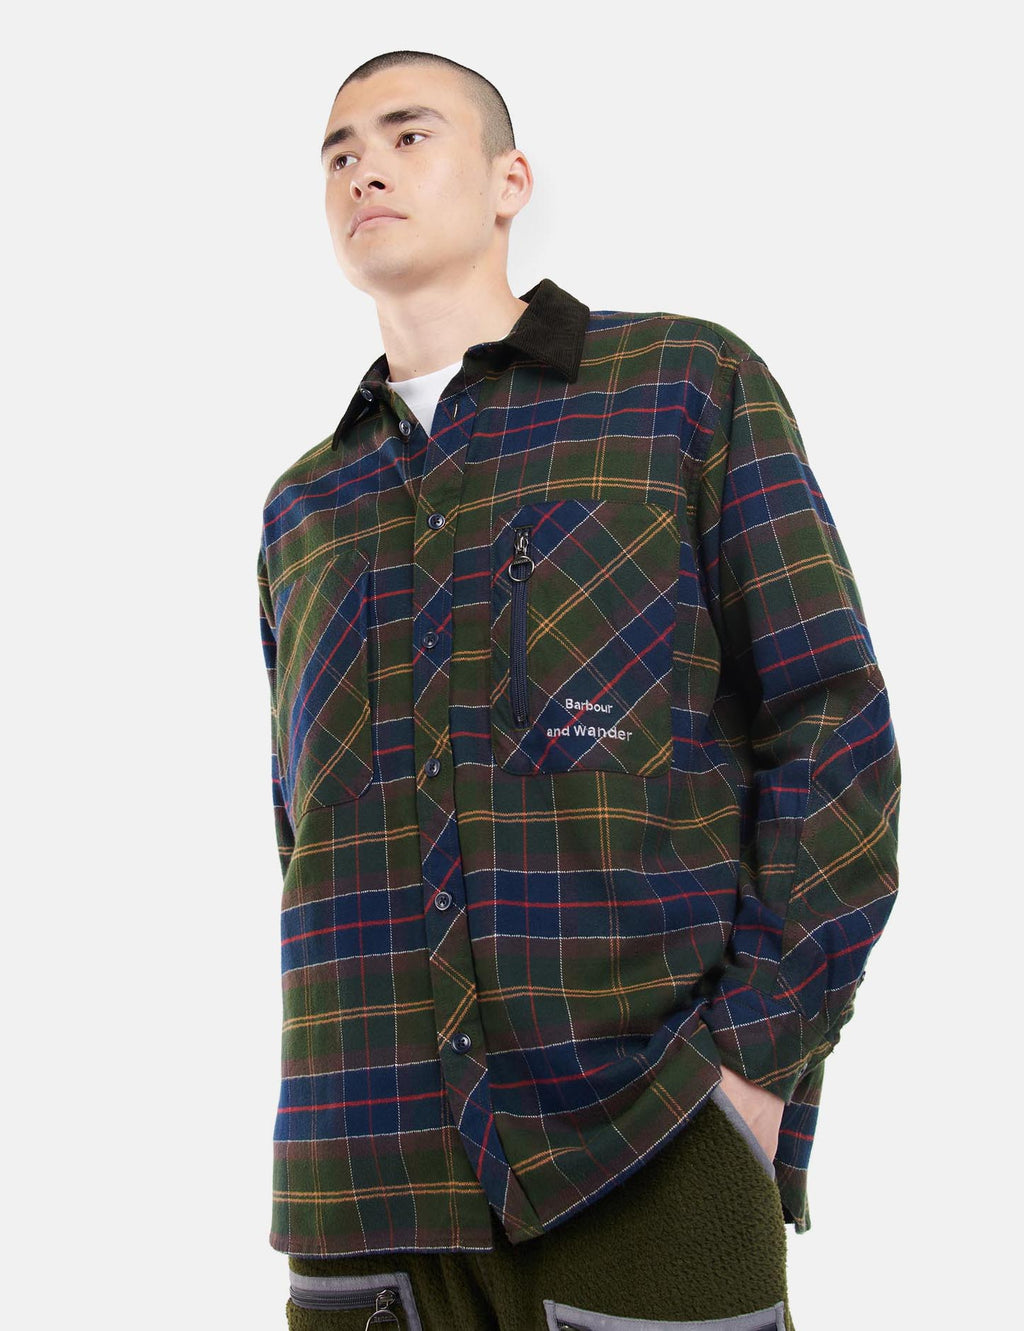 Barbour and wander タータン シャツ sizeM定価31900円